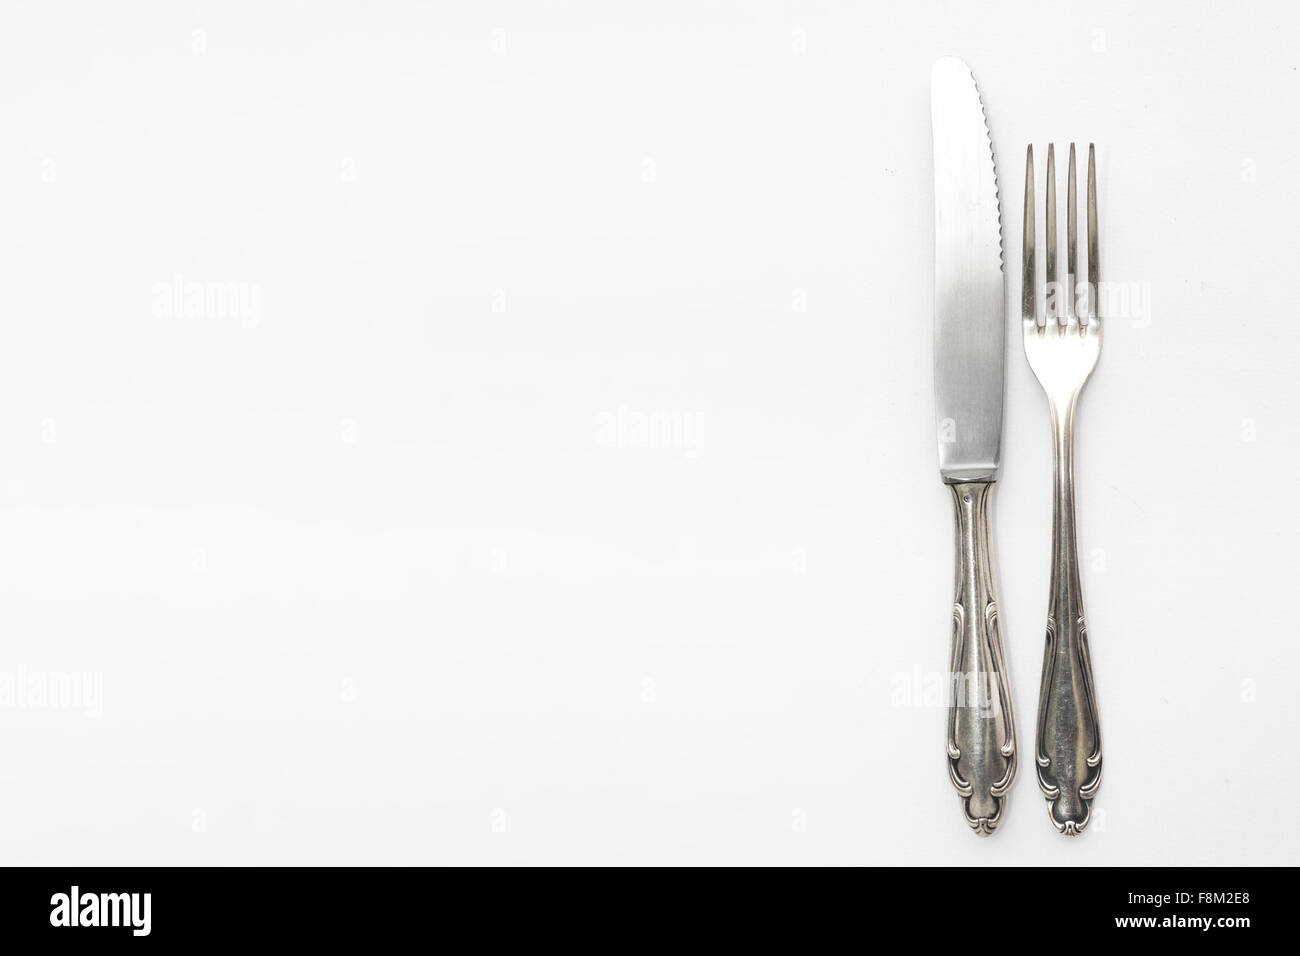 knife, fork - beautiful old sterling silver cutlery set on white background, copy space Stock Photo